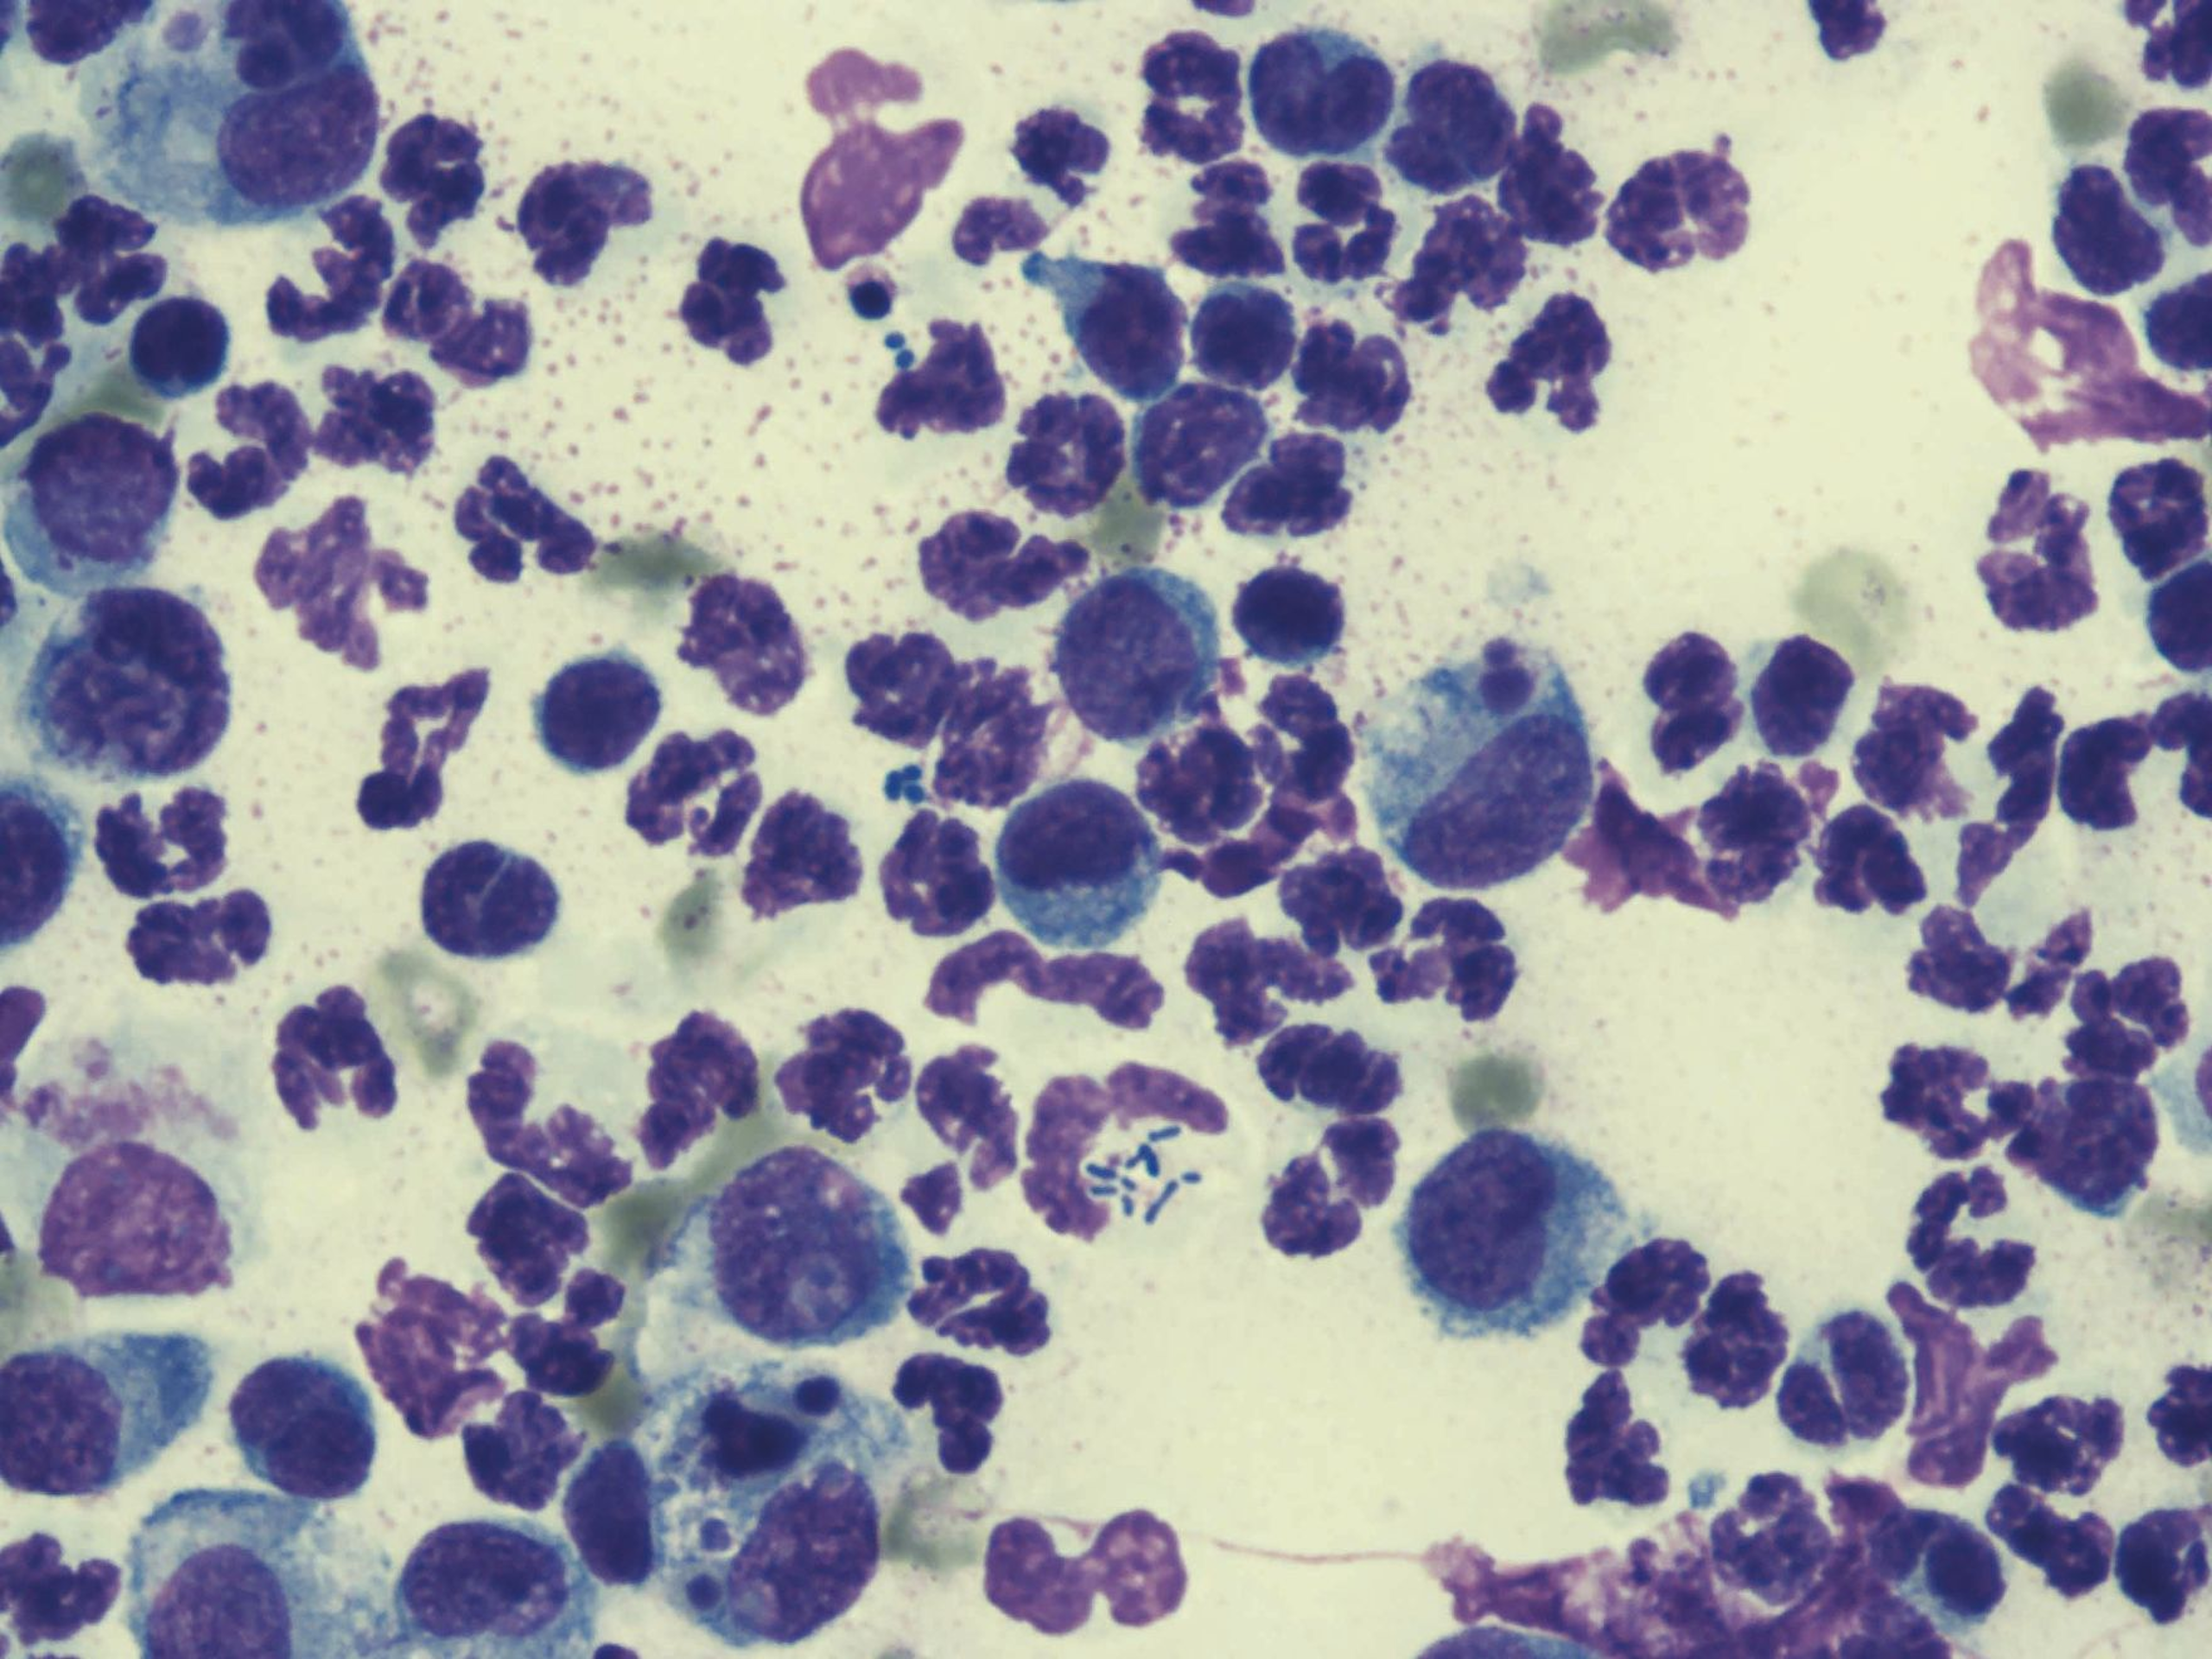 x100 oil immersion of a direct impression smear showing pyogranulomatous inflammation with intracellular.